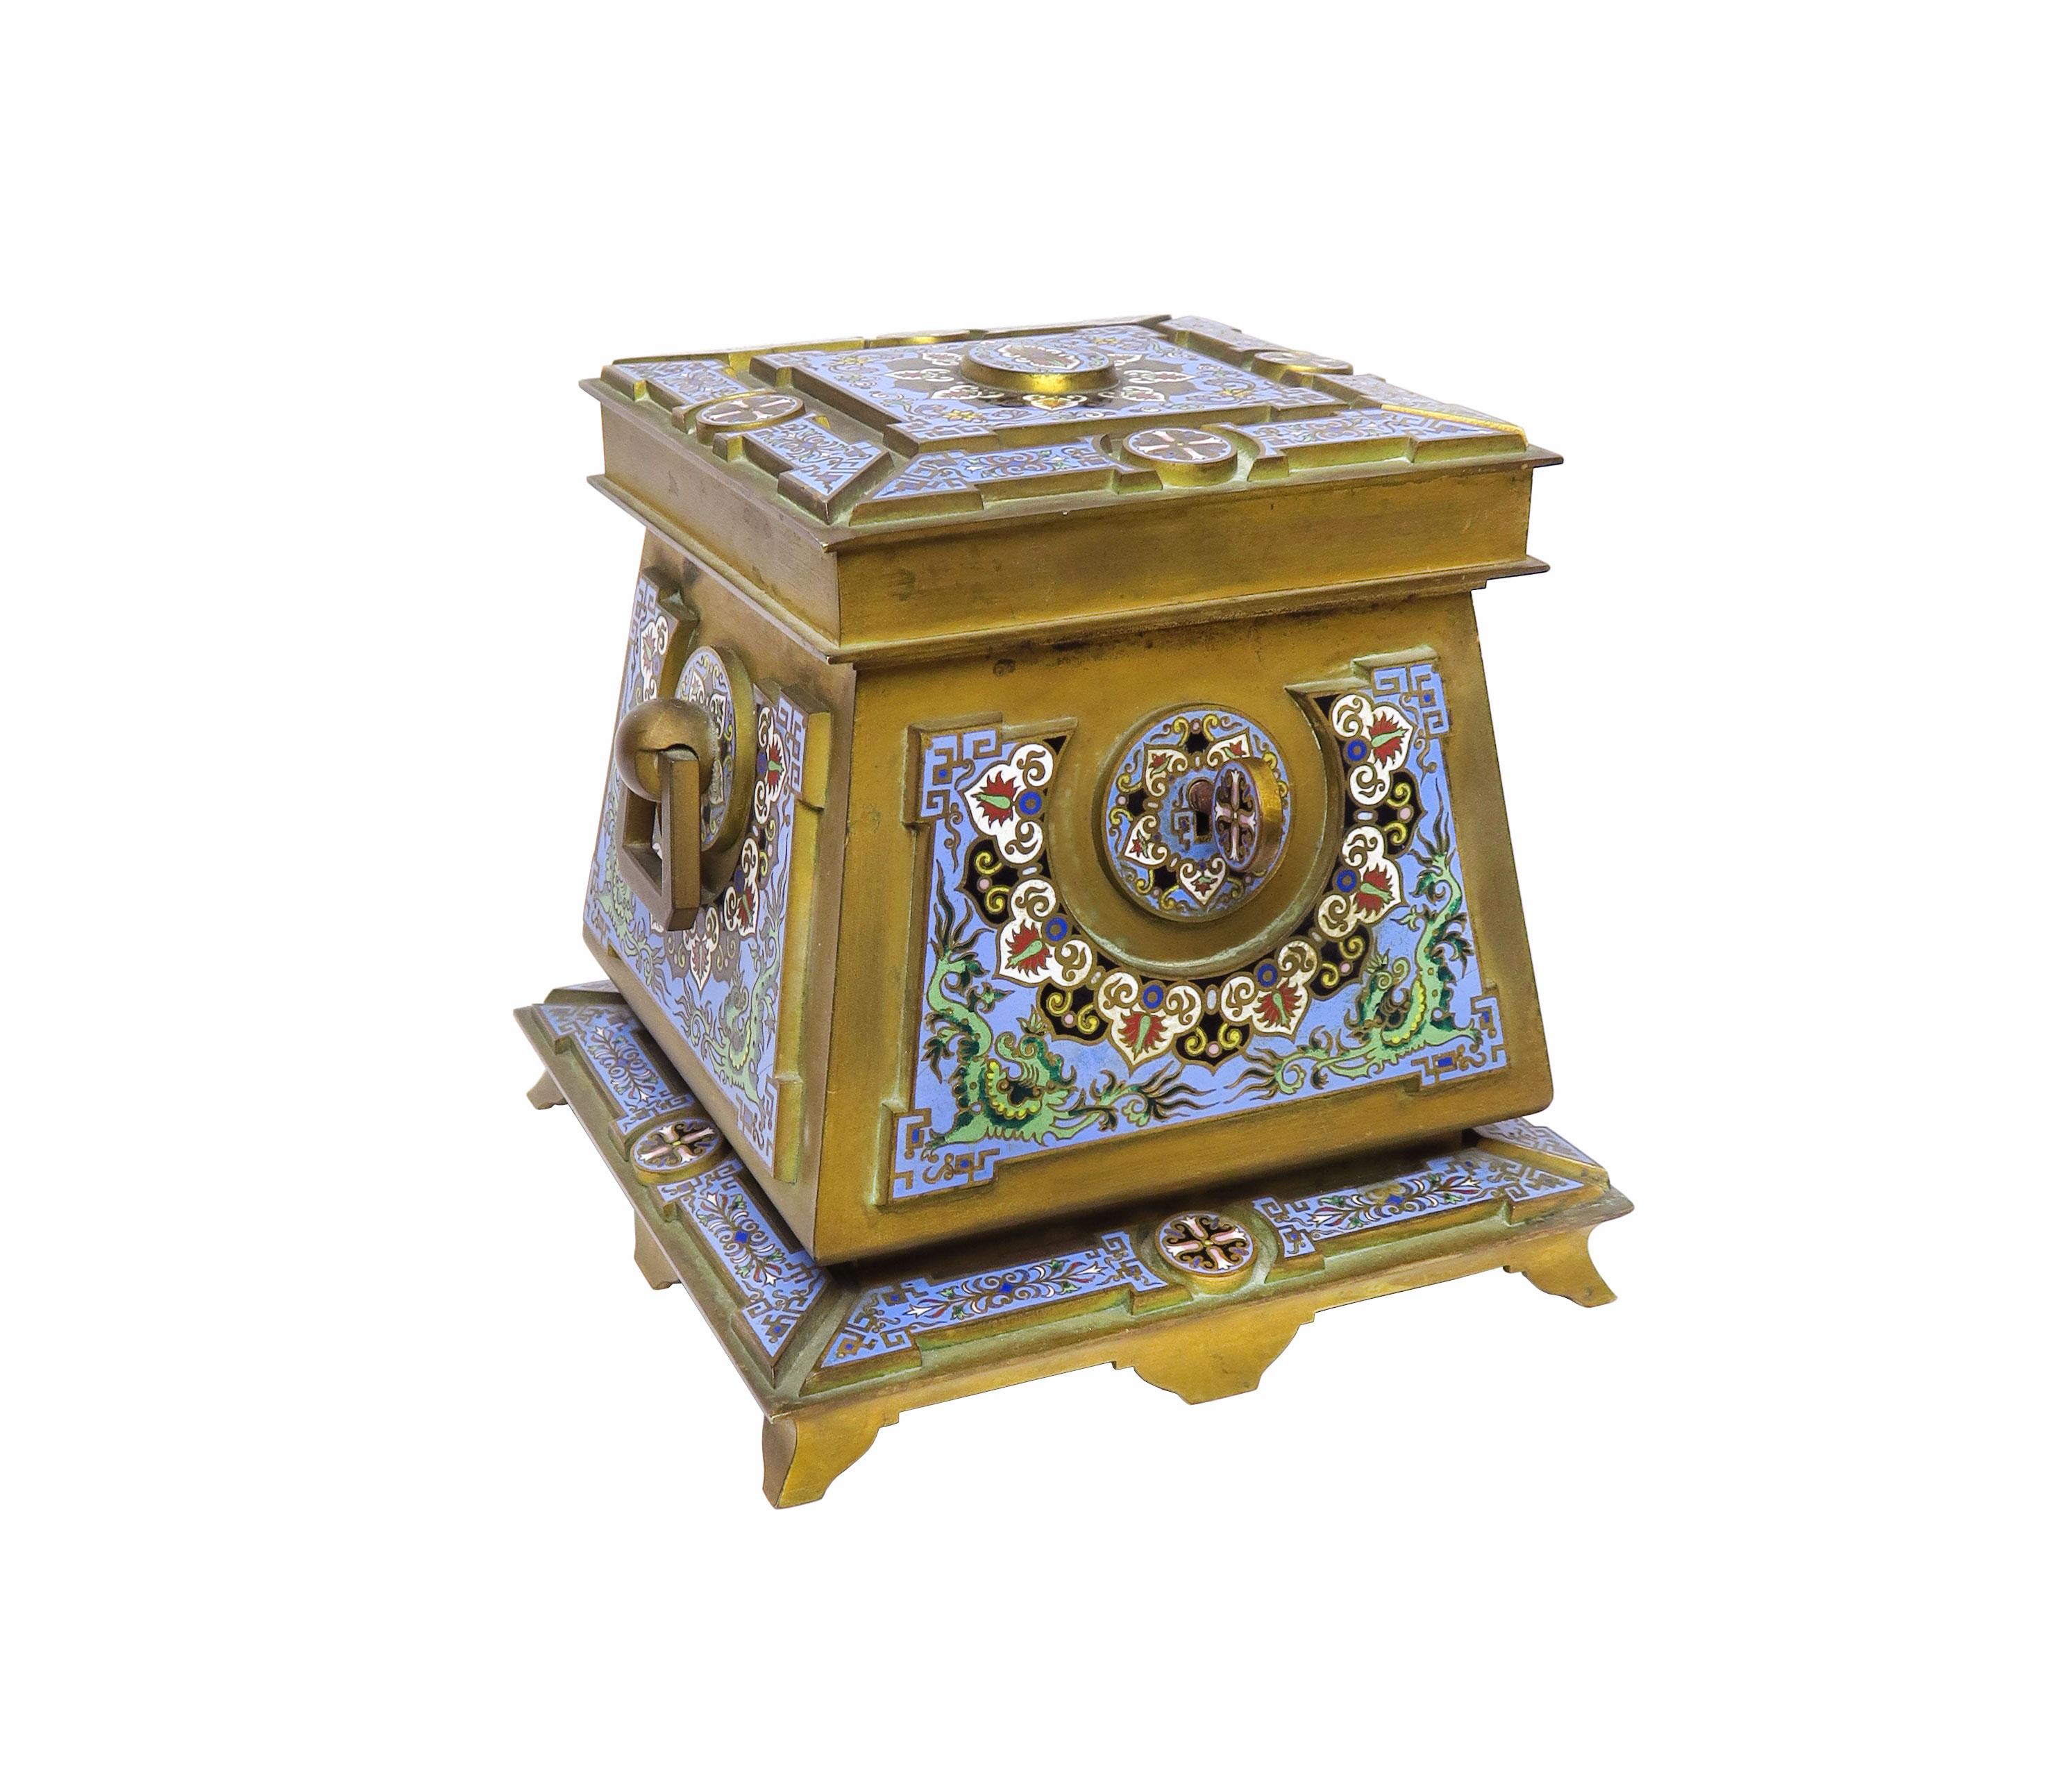 A French Gilt-Bronze and Cloisonne Enamel Casket Possibly by Ferdinand Barbedienne, Late 19th Century.

D: 6-3/4